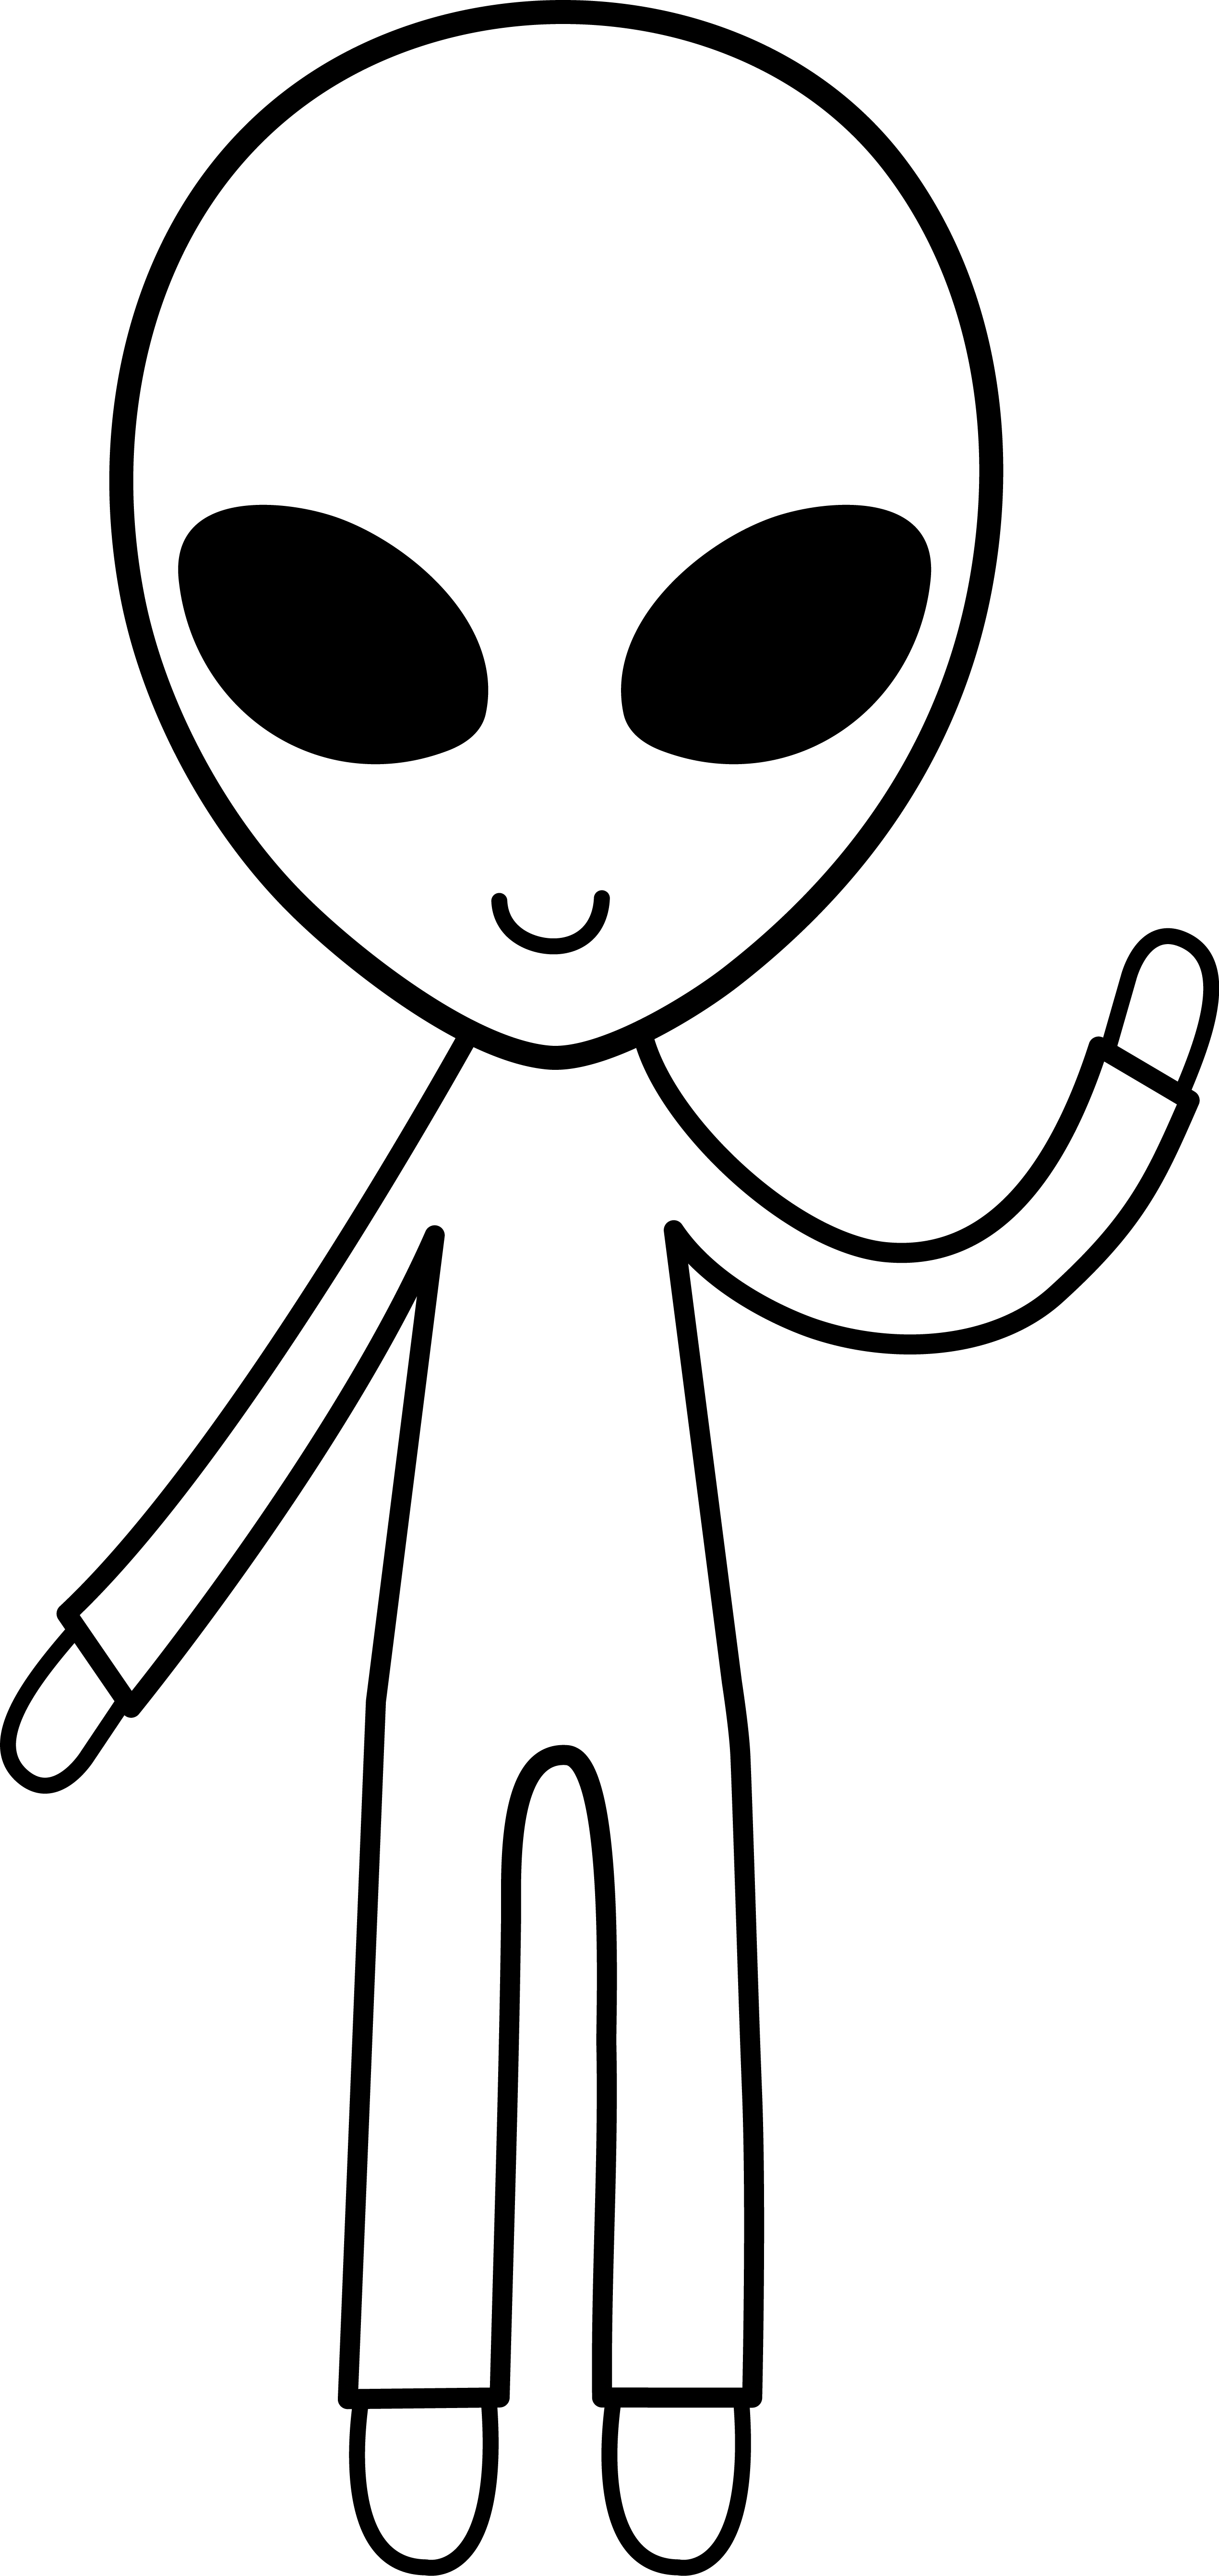 Alien black and white. Friendly clipart friendly face